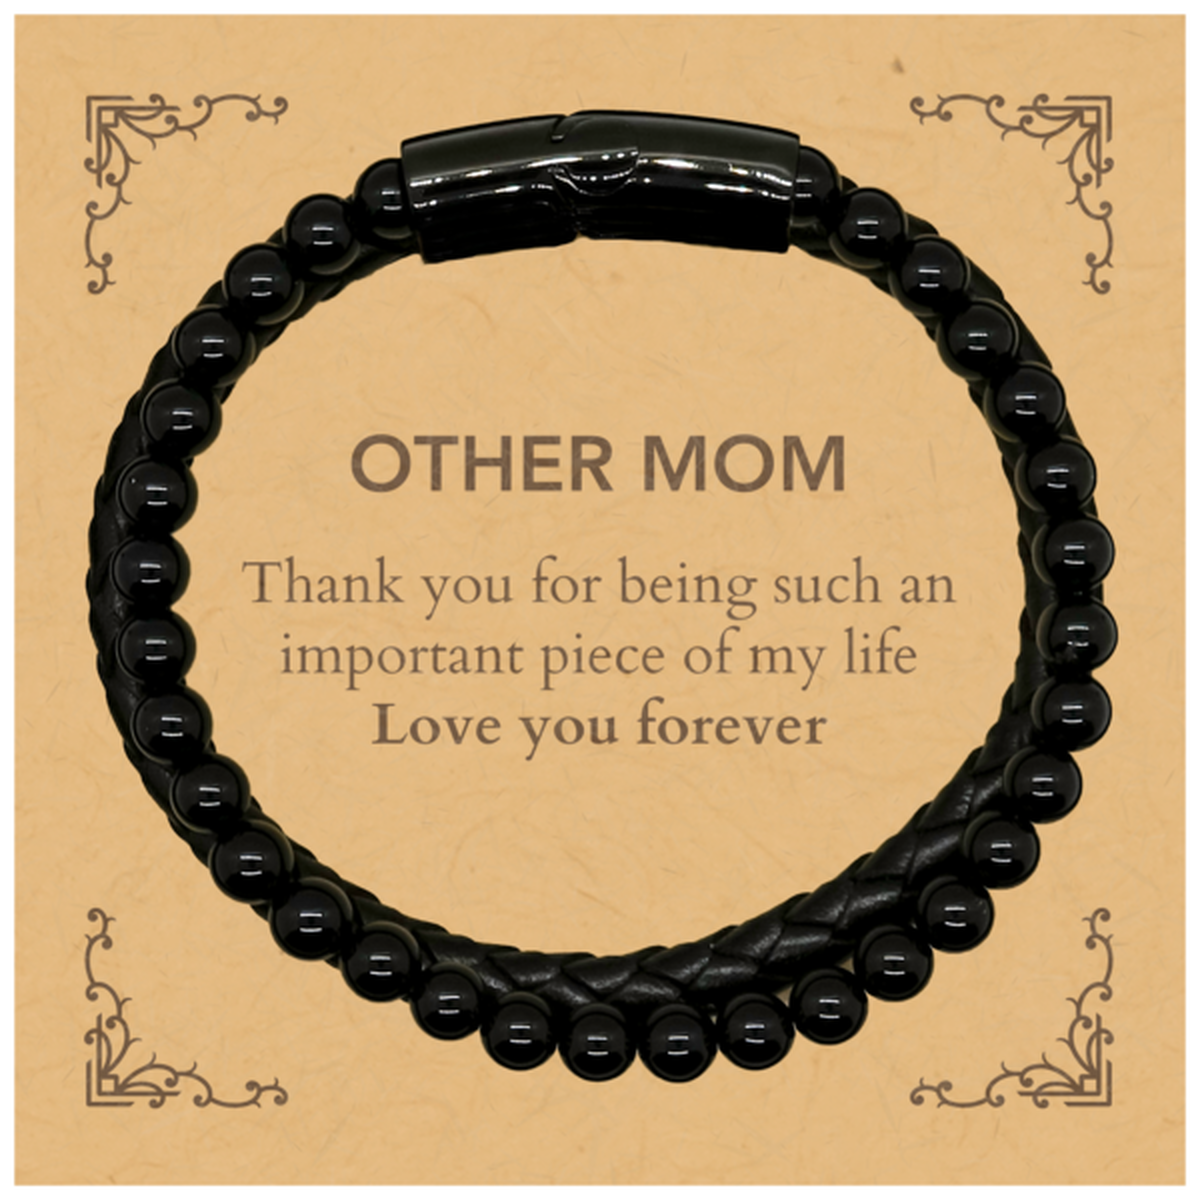 Appropriate Other Mom Stone Leather Bracelets Epic Birthday Gifts for Other Mom Thank you for being such an important piece of my life Other Mom Christmas Mothers Fathers Day